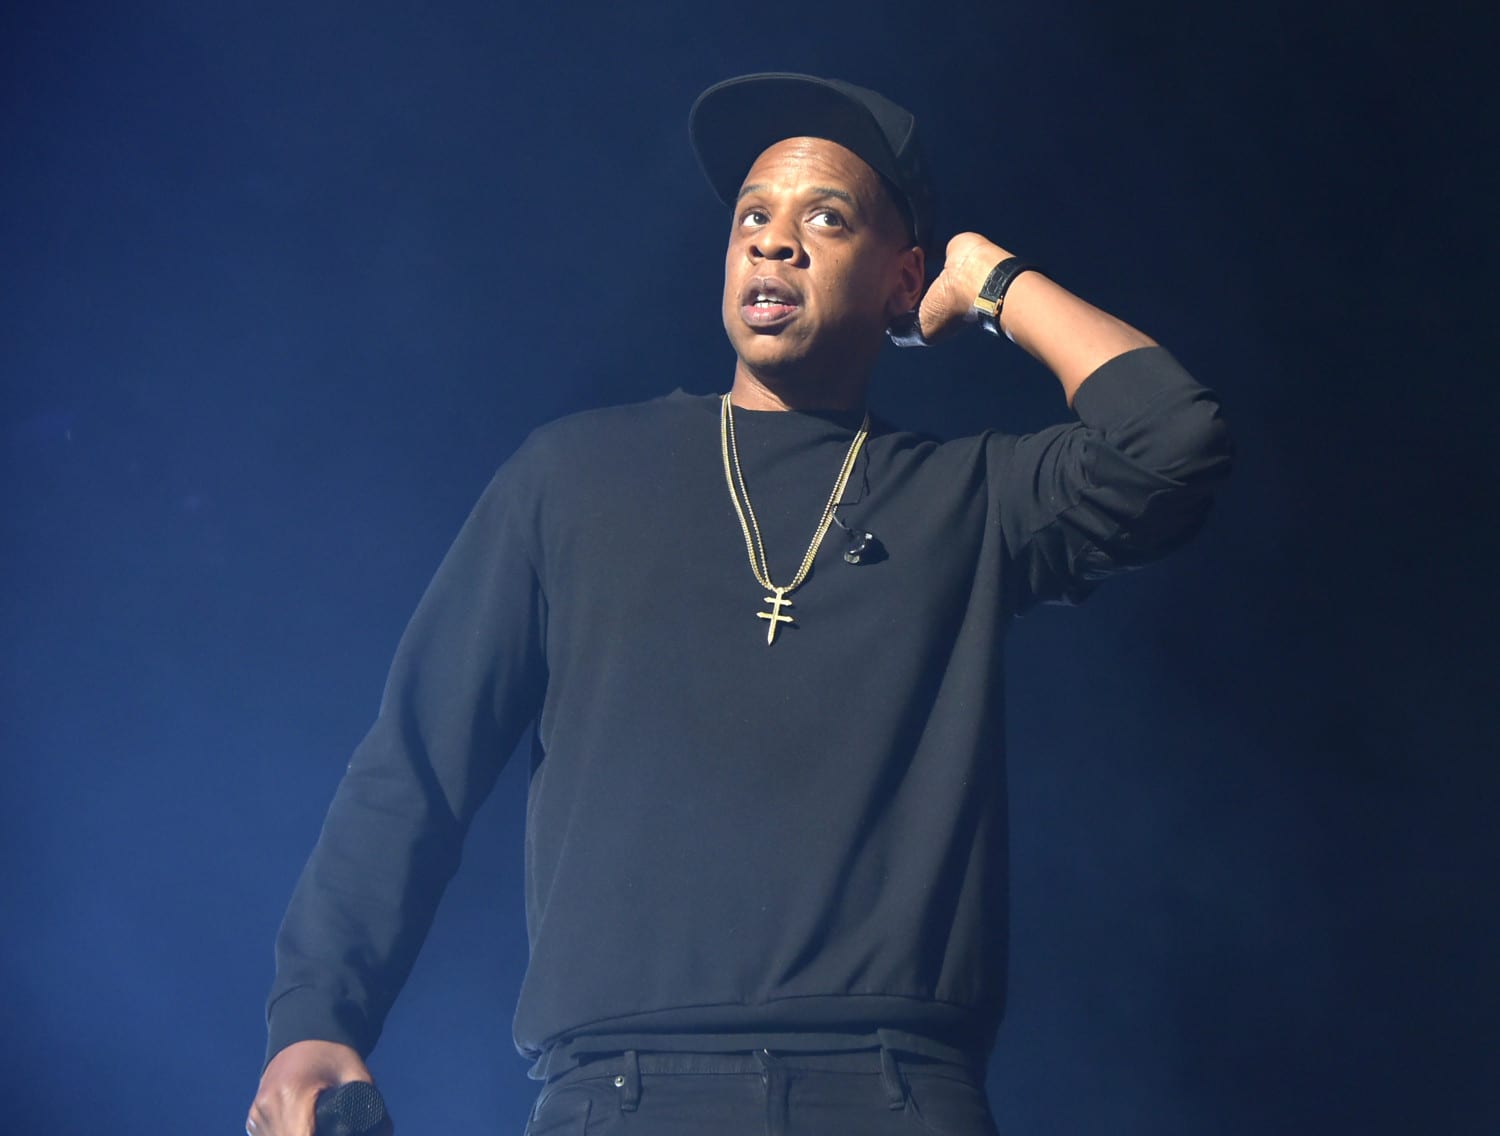 jay-z performs photo